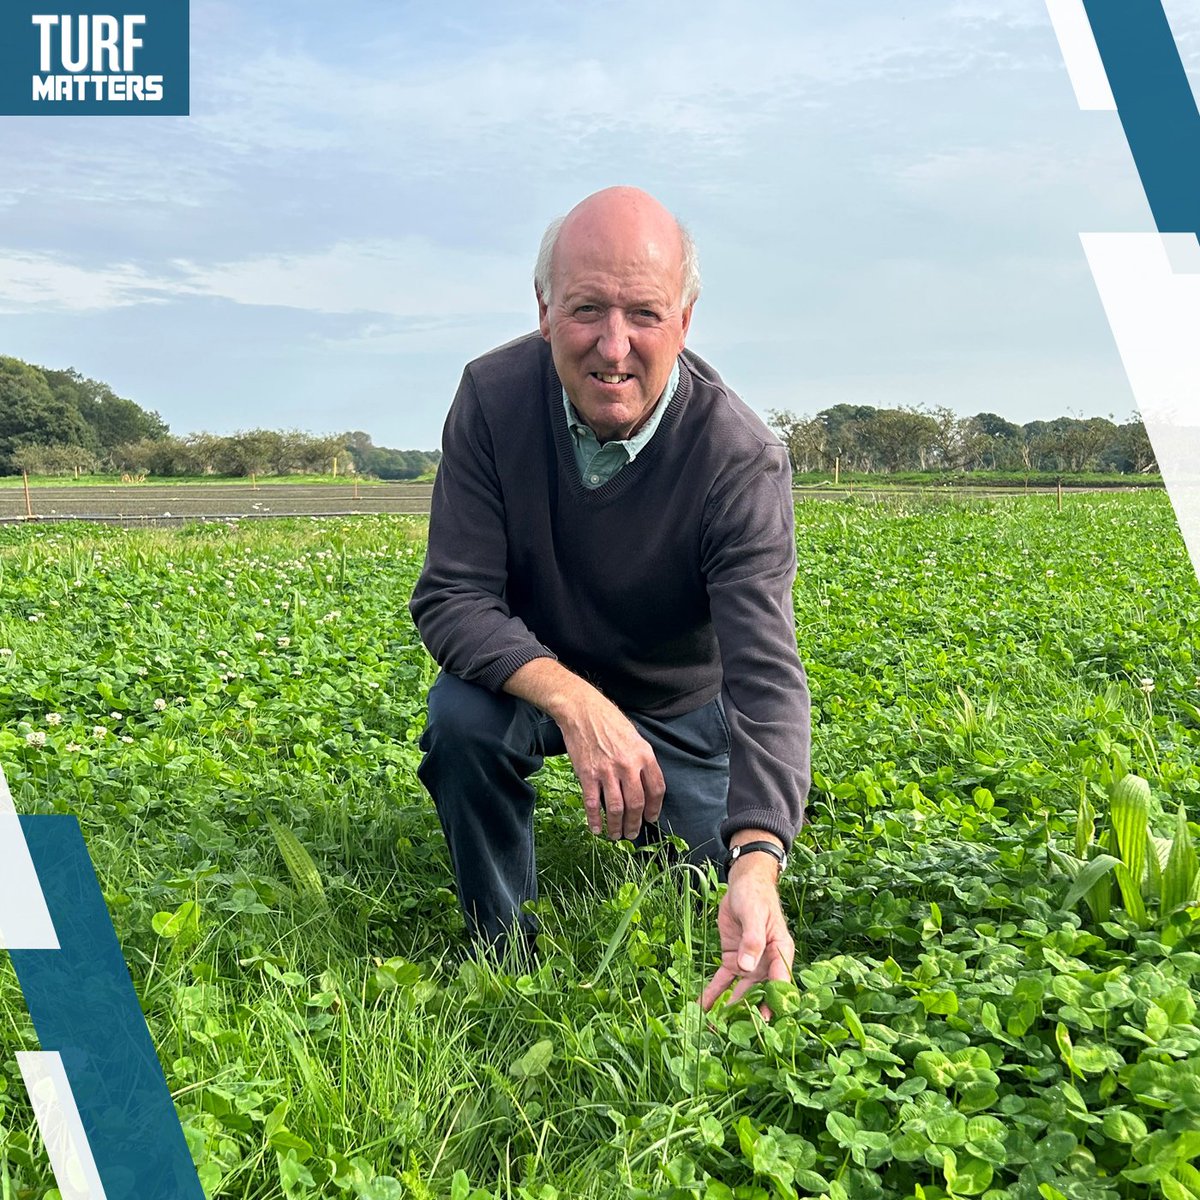 #TurfNews A north Yorkshire turf grower has been nominated for an award at the world’s most prestigious gardening show for the second year in succession. Read more 👉 turfmatters.co.uk/lindum-turf-up…